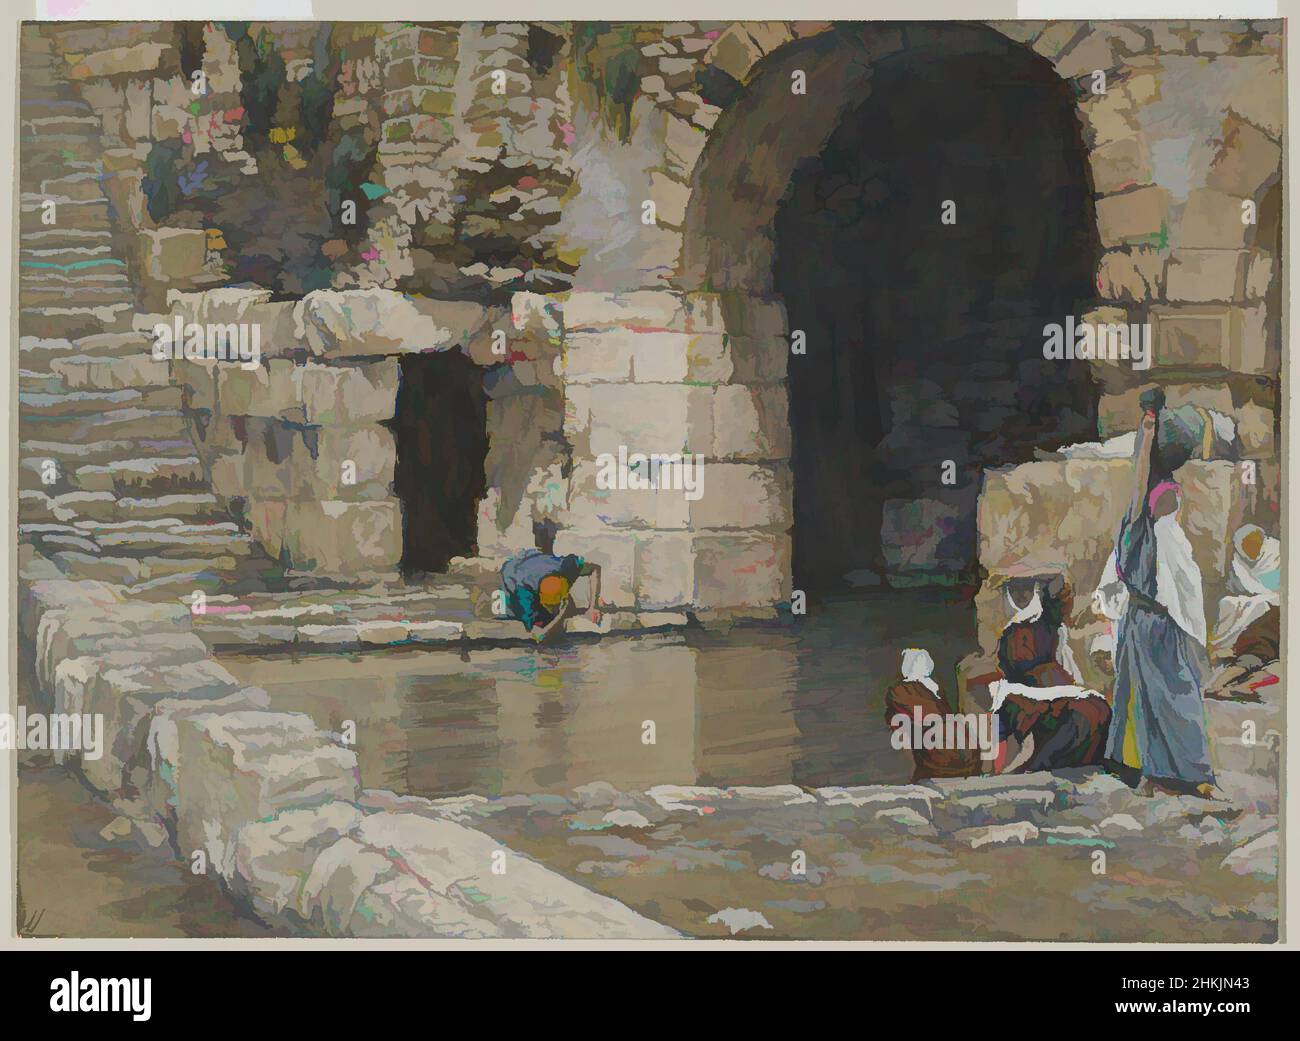 Art inspired by The Blind Man Washes in the Pool of Siloam, Le aveugle-né se lave à la piscine de Siloë, The Life of Our Lord Jesus Christ, La Vie de Notre-Seigneur Jésus-Christ, James Tissot, French, 1836-1902, Opaque watercolor over graphite on gray wove paper, France, 1886-1894, Classic works modernized by Artotop with a splash of modernity. Shapes, color and value, eye-catching visual impact on art. Emotions through freedom of artworks in a contemporary way. A timeless message pursuing a wildly creative new direction. Artists turning to the digital medium and creating the Artotop NFT Stock Photo